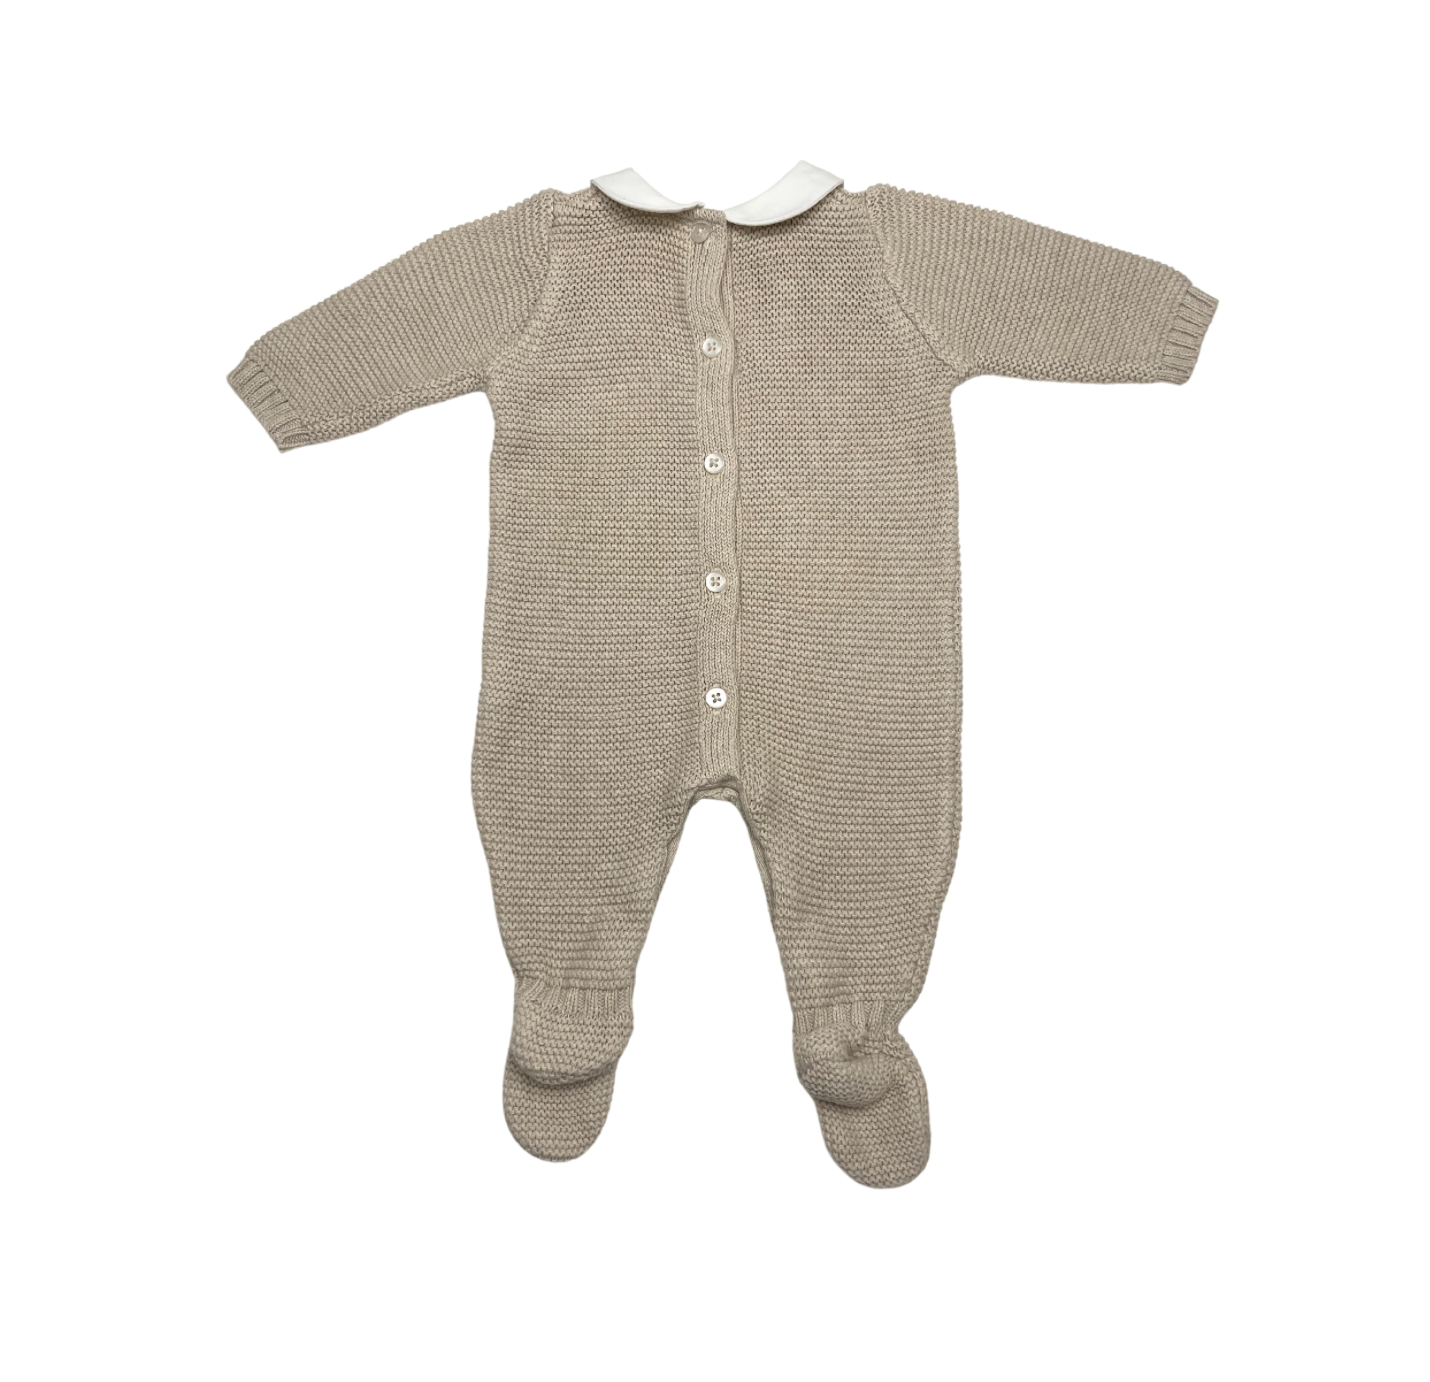 MY FIRST CHICCO - Combinaison beige - 1 mois